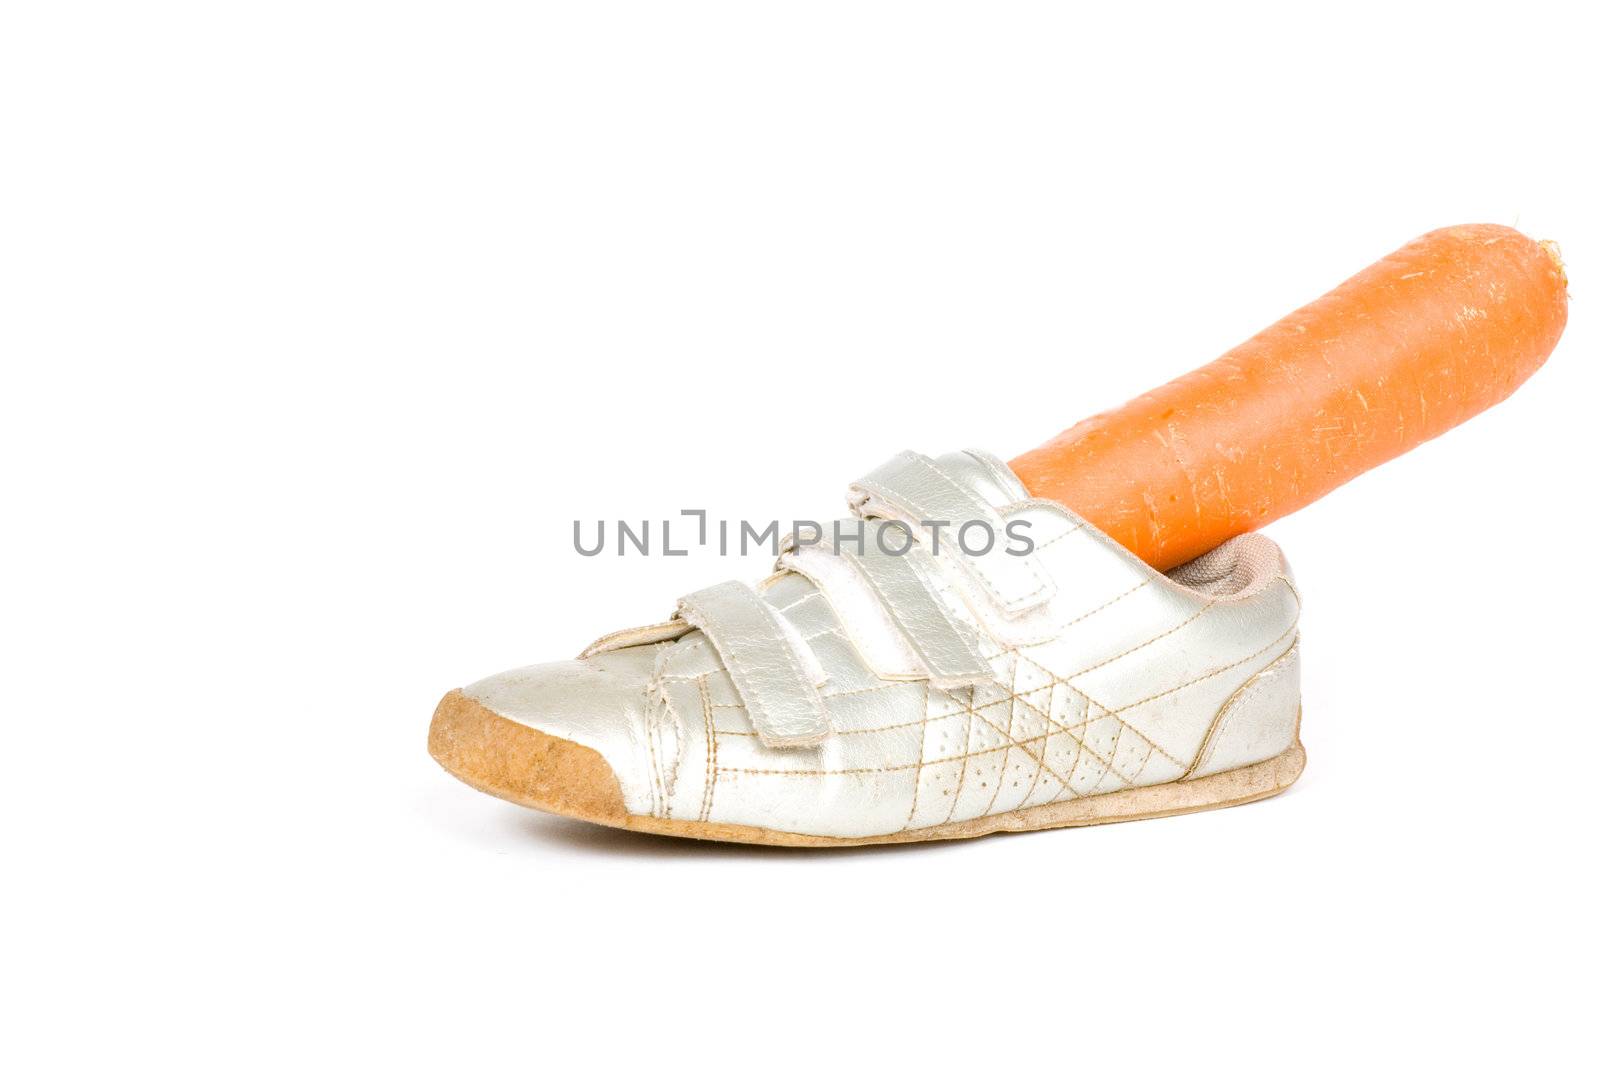 Shoe with carrot for the horse from Sinterklaas  on white

